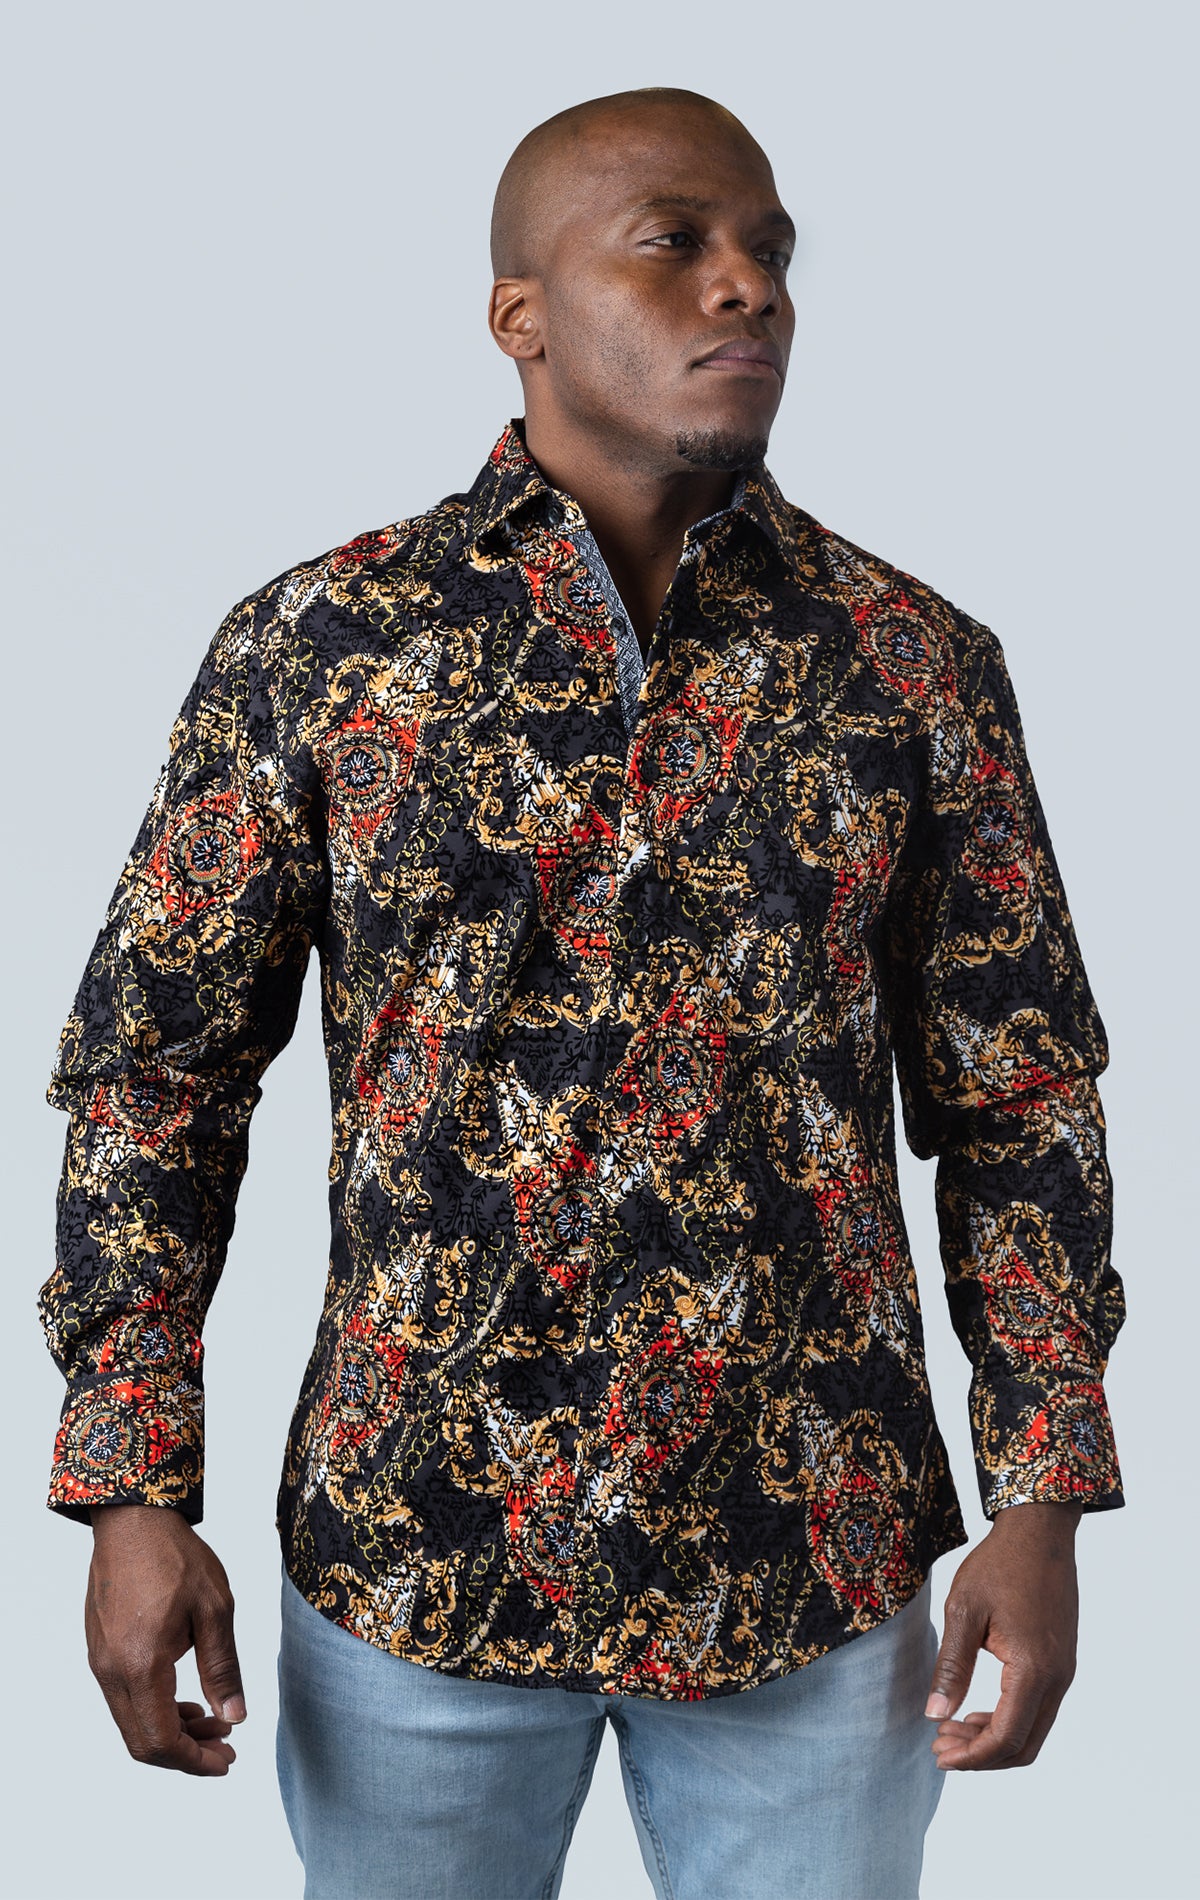 Long sleeve button up dress shirt with pattern